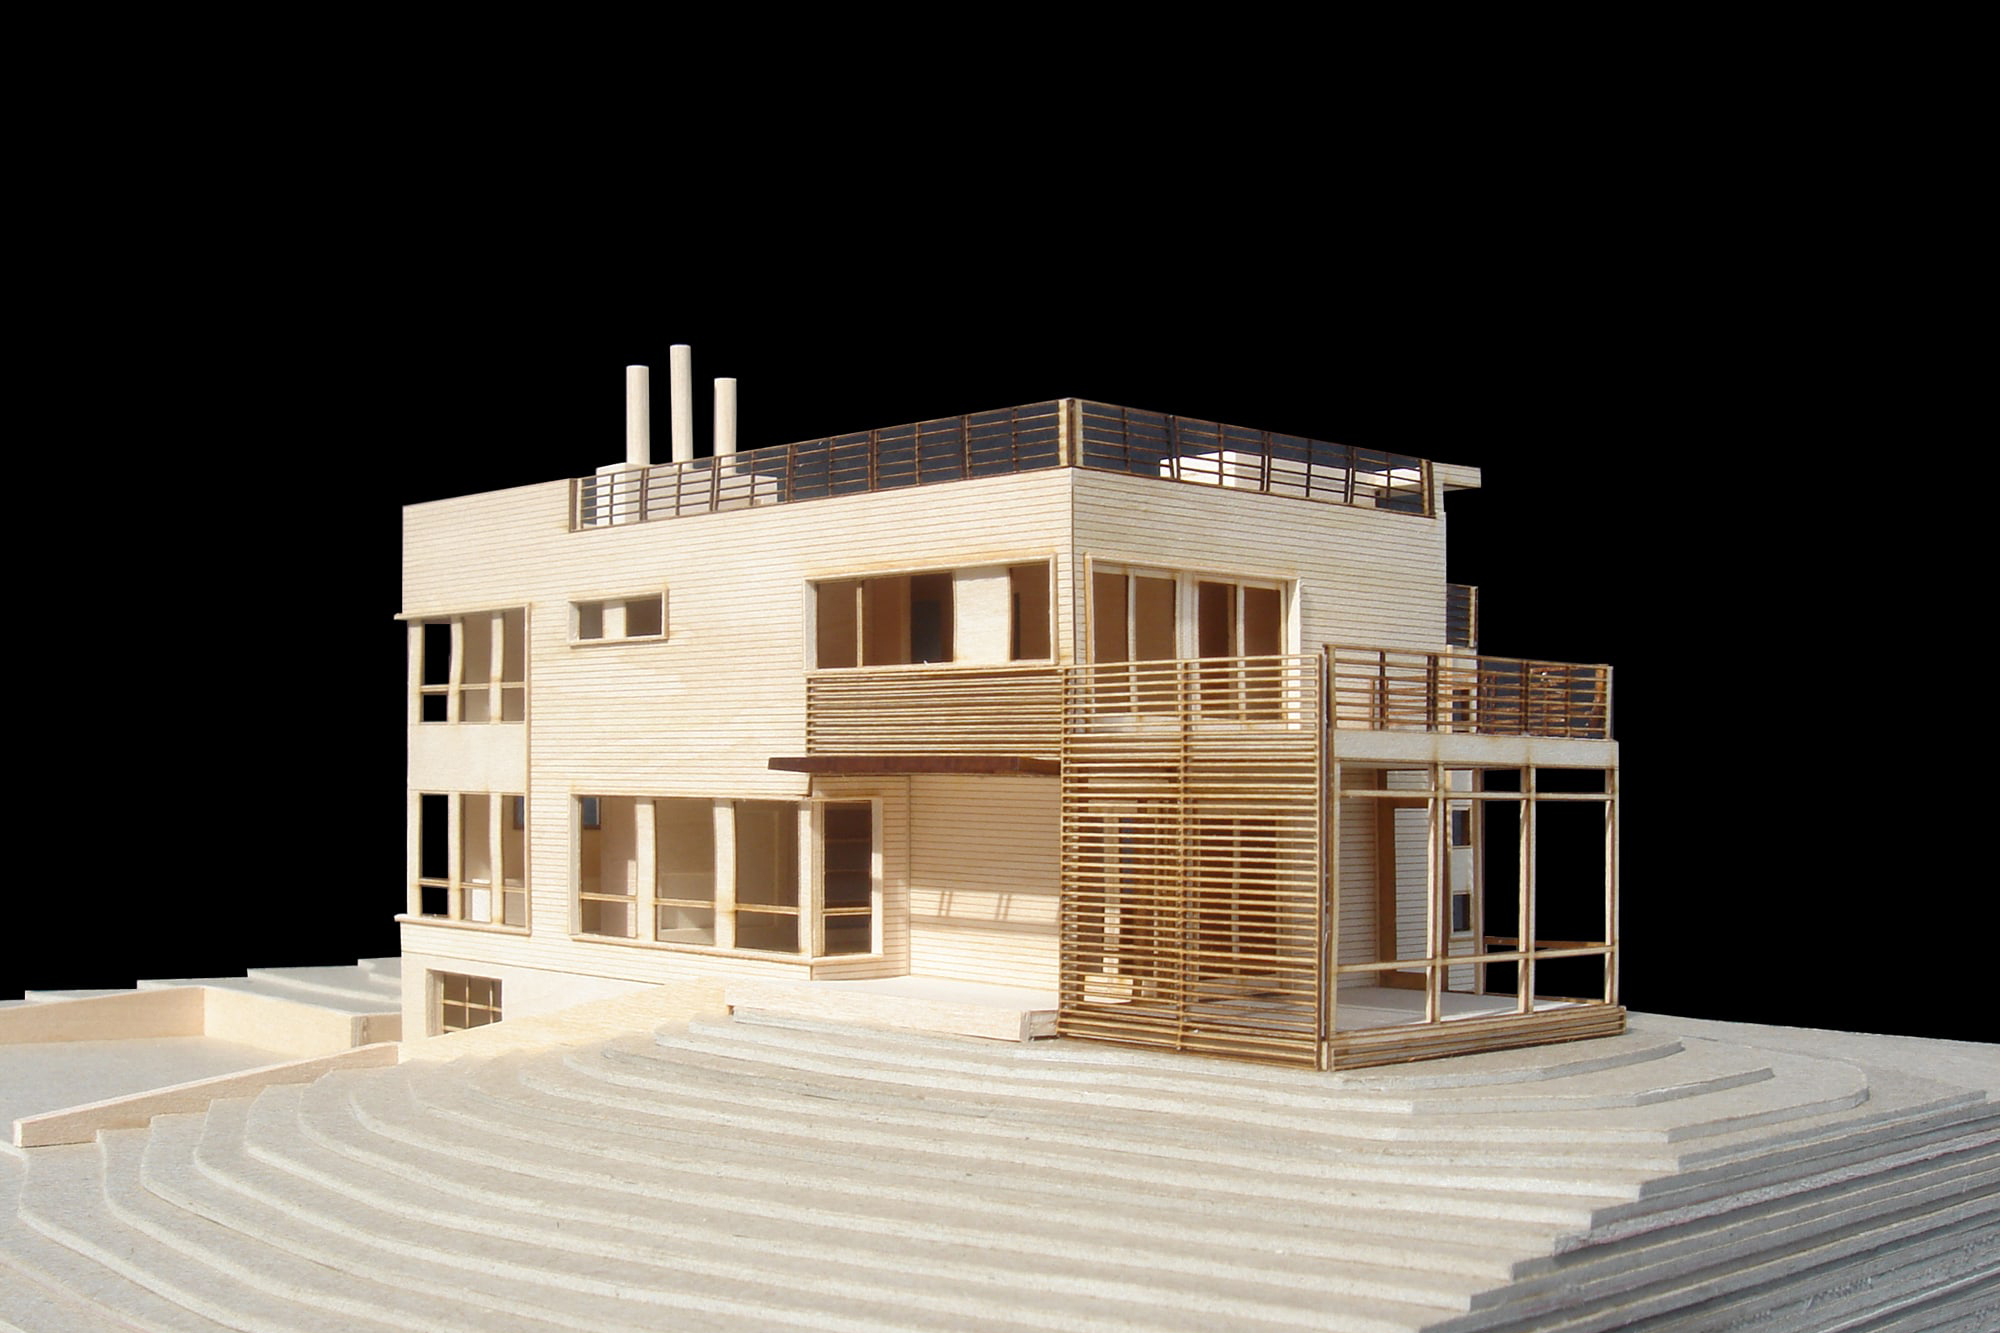 res4-resolution-4-architecture-cape house-model-03.jpg